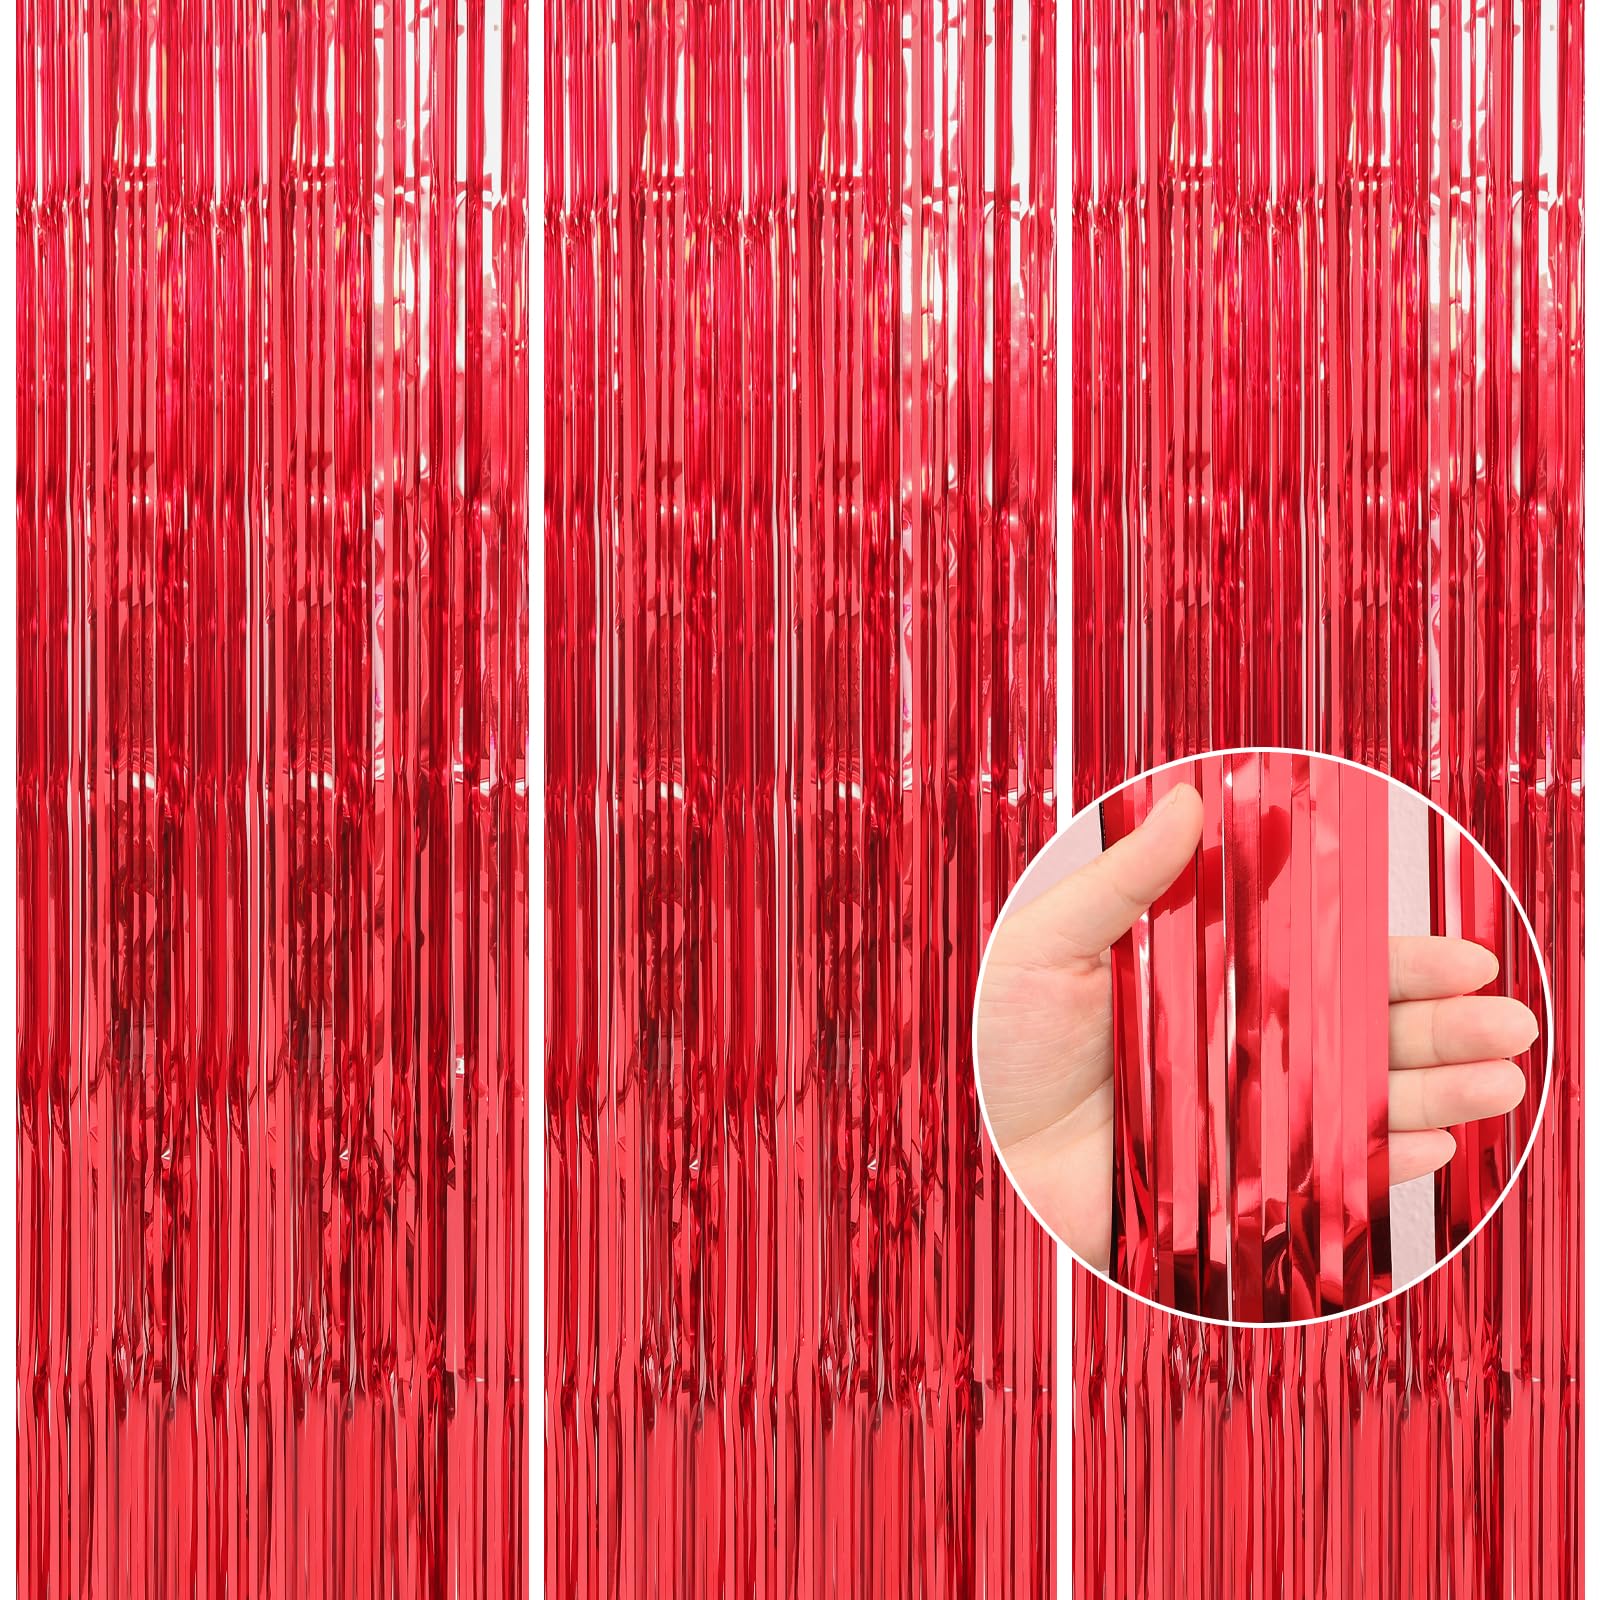 Crosize 2 Pack 3.3 x 9.9 ft Foil Fringe Curtains Party Decorations, Red Tinsel Curtain Backdrop for Parties, Door Streamers, Glitter Streamer Fringe Backdrop for Birthday Decoration (Red)